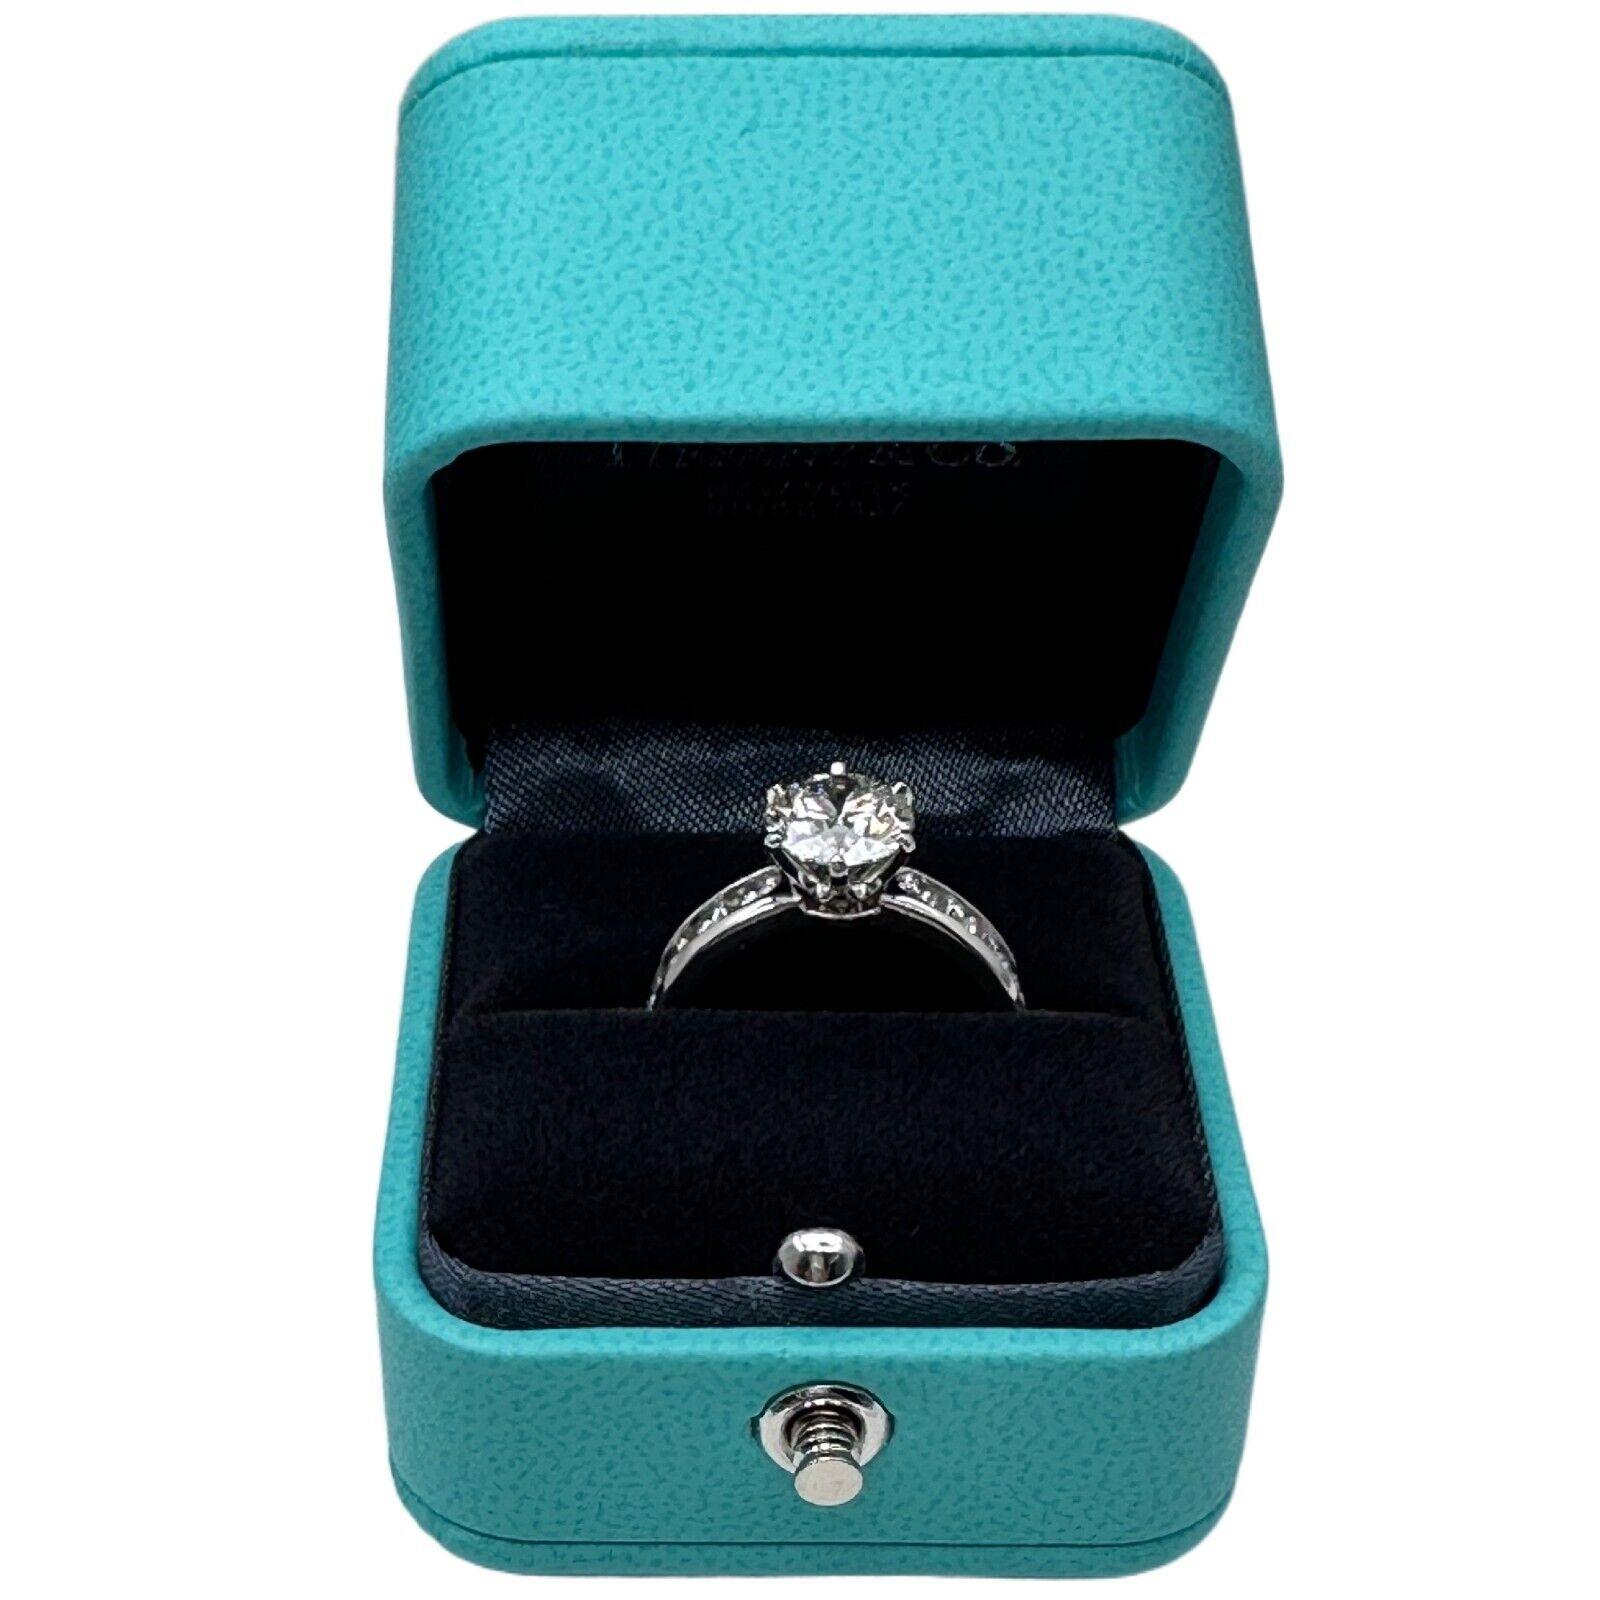 Tiffany & Co. 2.75 tcw Tiffany Setting Channel-Set Diamond Band Eng Ring Plat For Sale 10